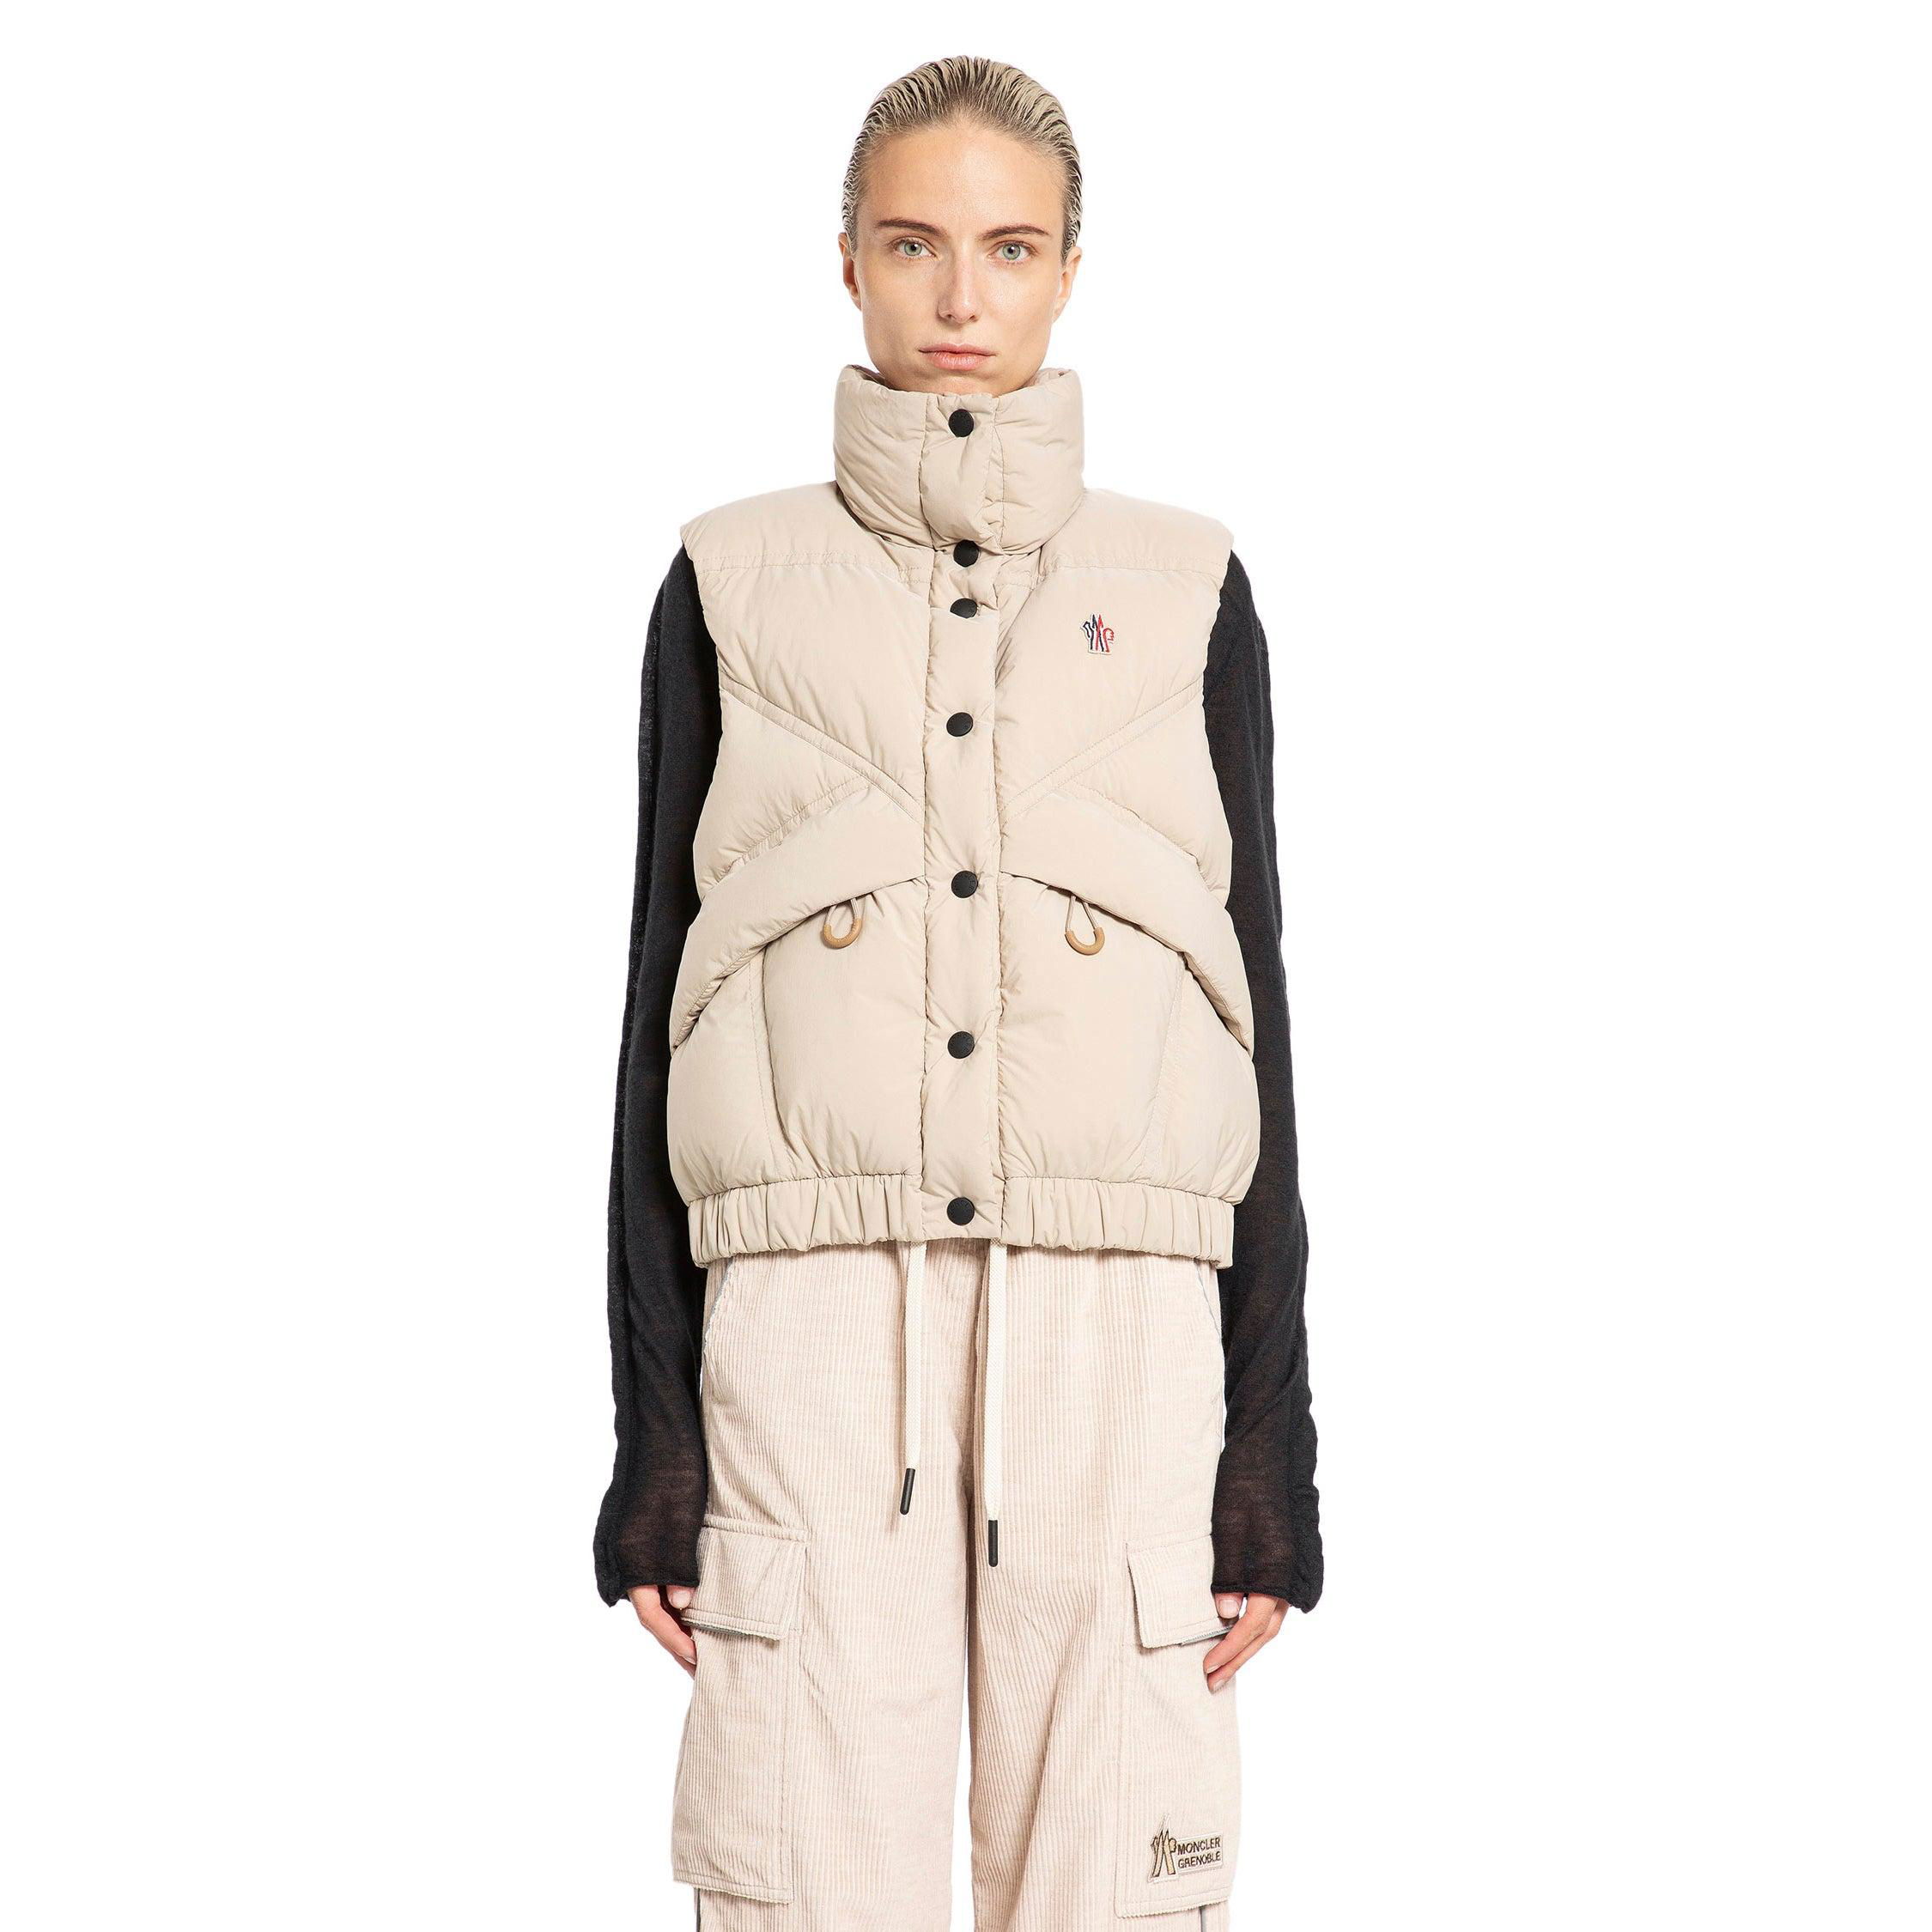 MONCLER GRENOBLE WOMAN BEIGE JACKETS by MONCLER